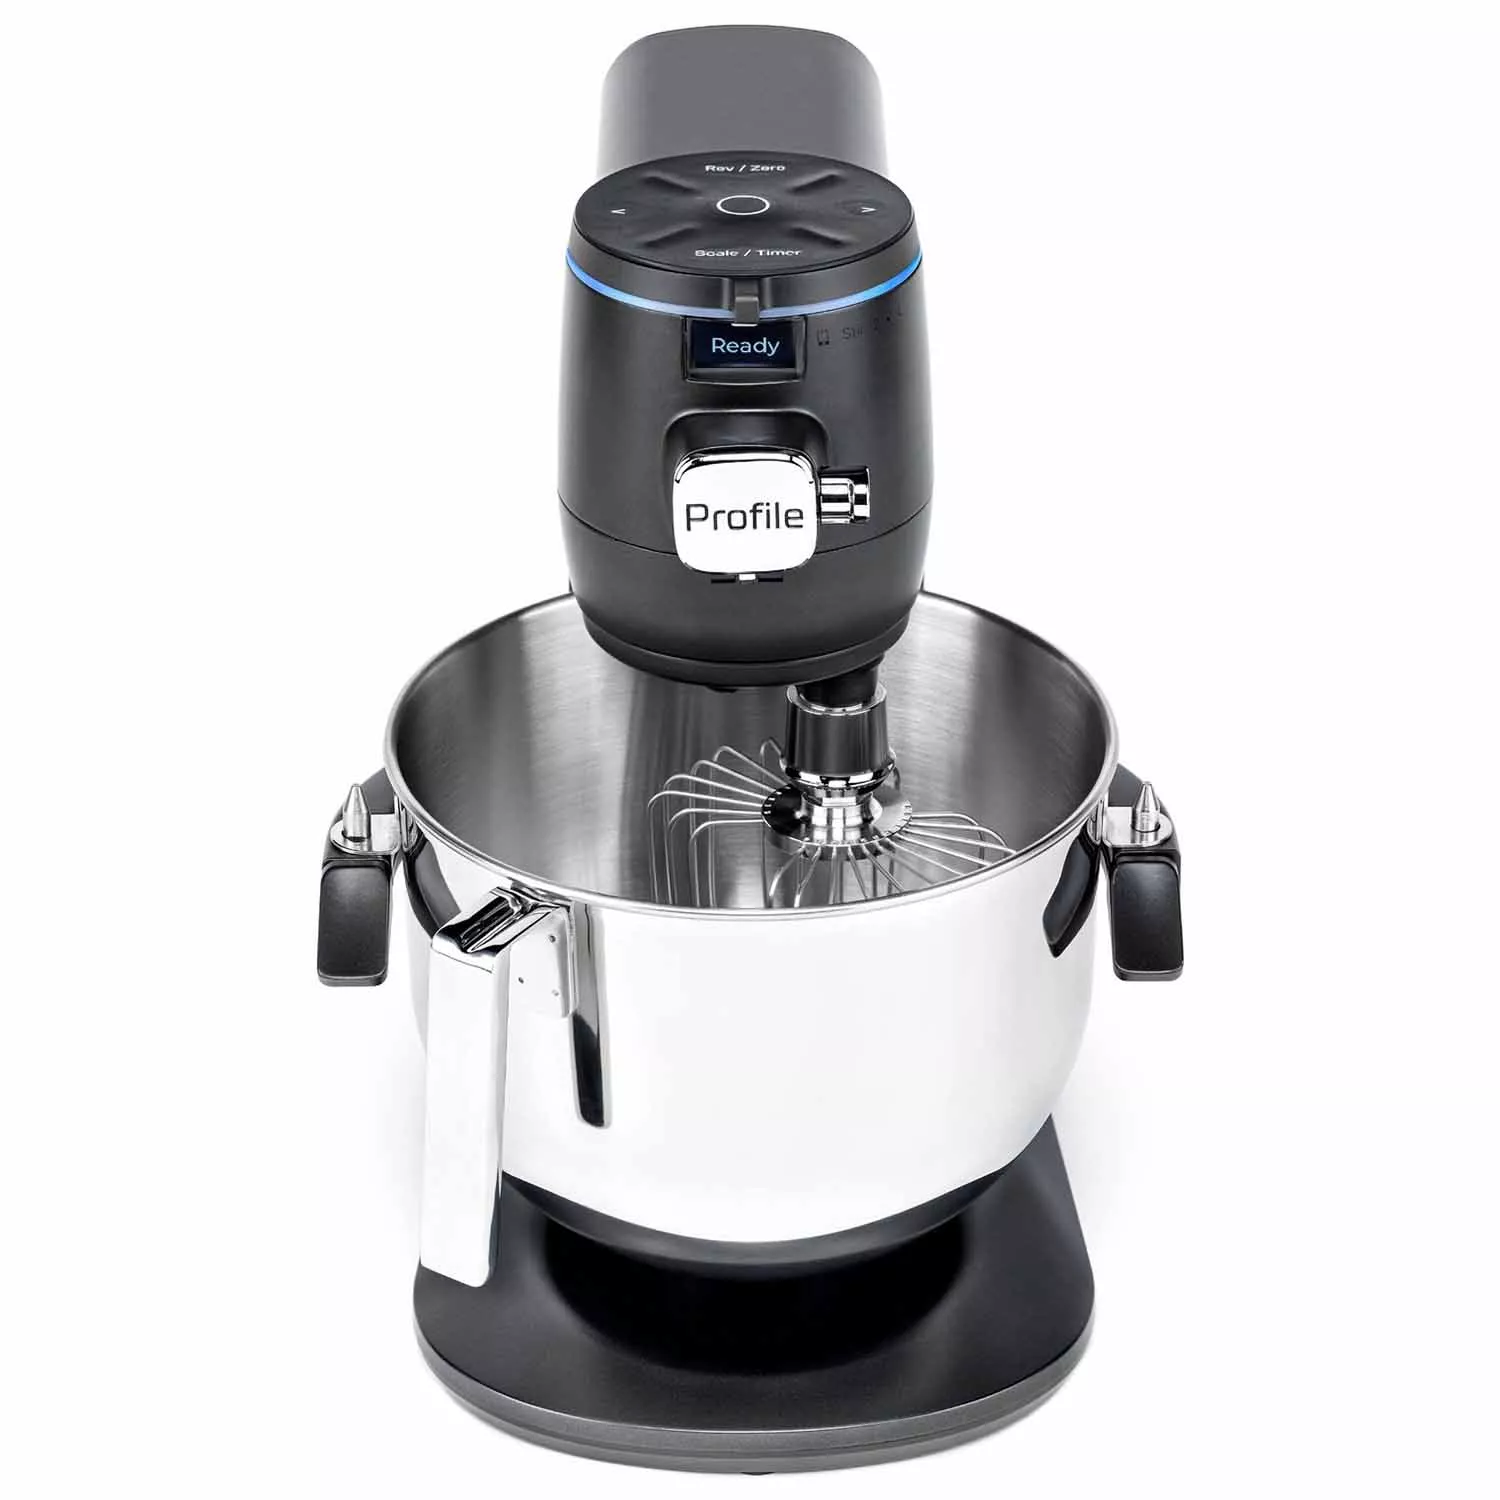 The GE Profile Smart Mixer with Auto Sense Features a Built-In